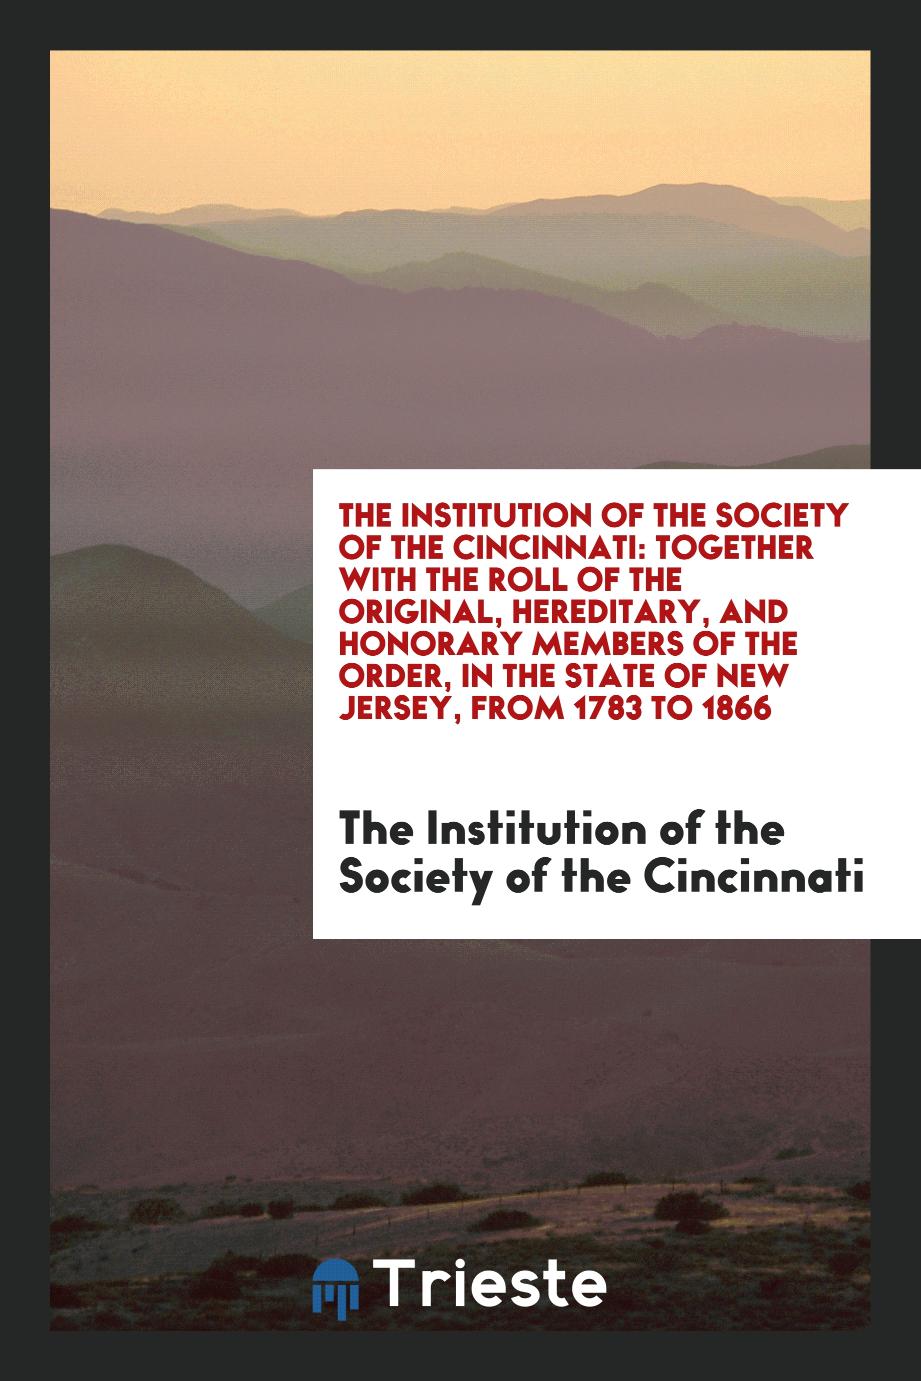 The Institution of the Society of the Cincinnati: Together with the Roll of the Original, Hereditary, and Honorary Members of the Order, in the State of New Jersey, from 1783 to 1866